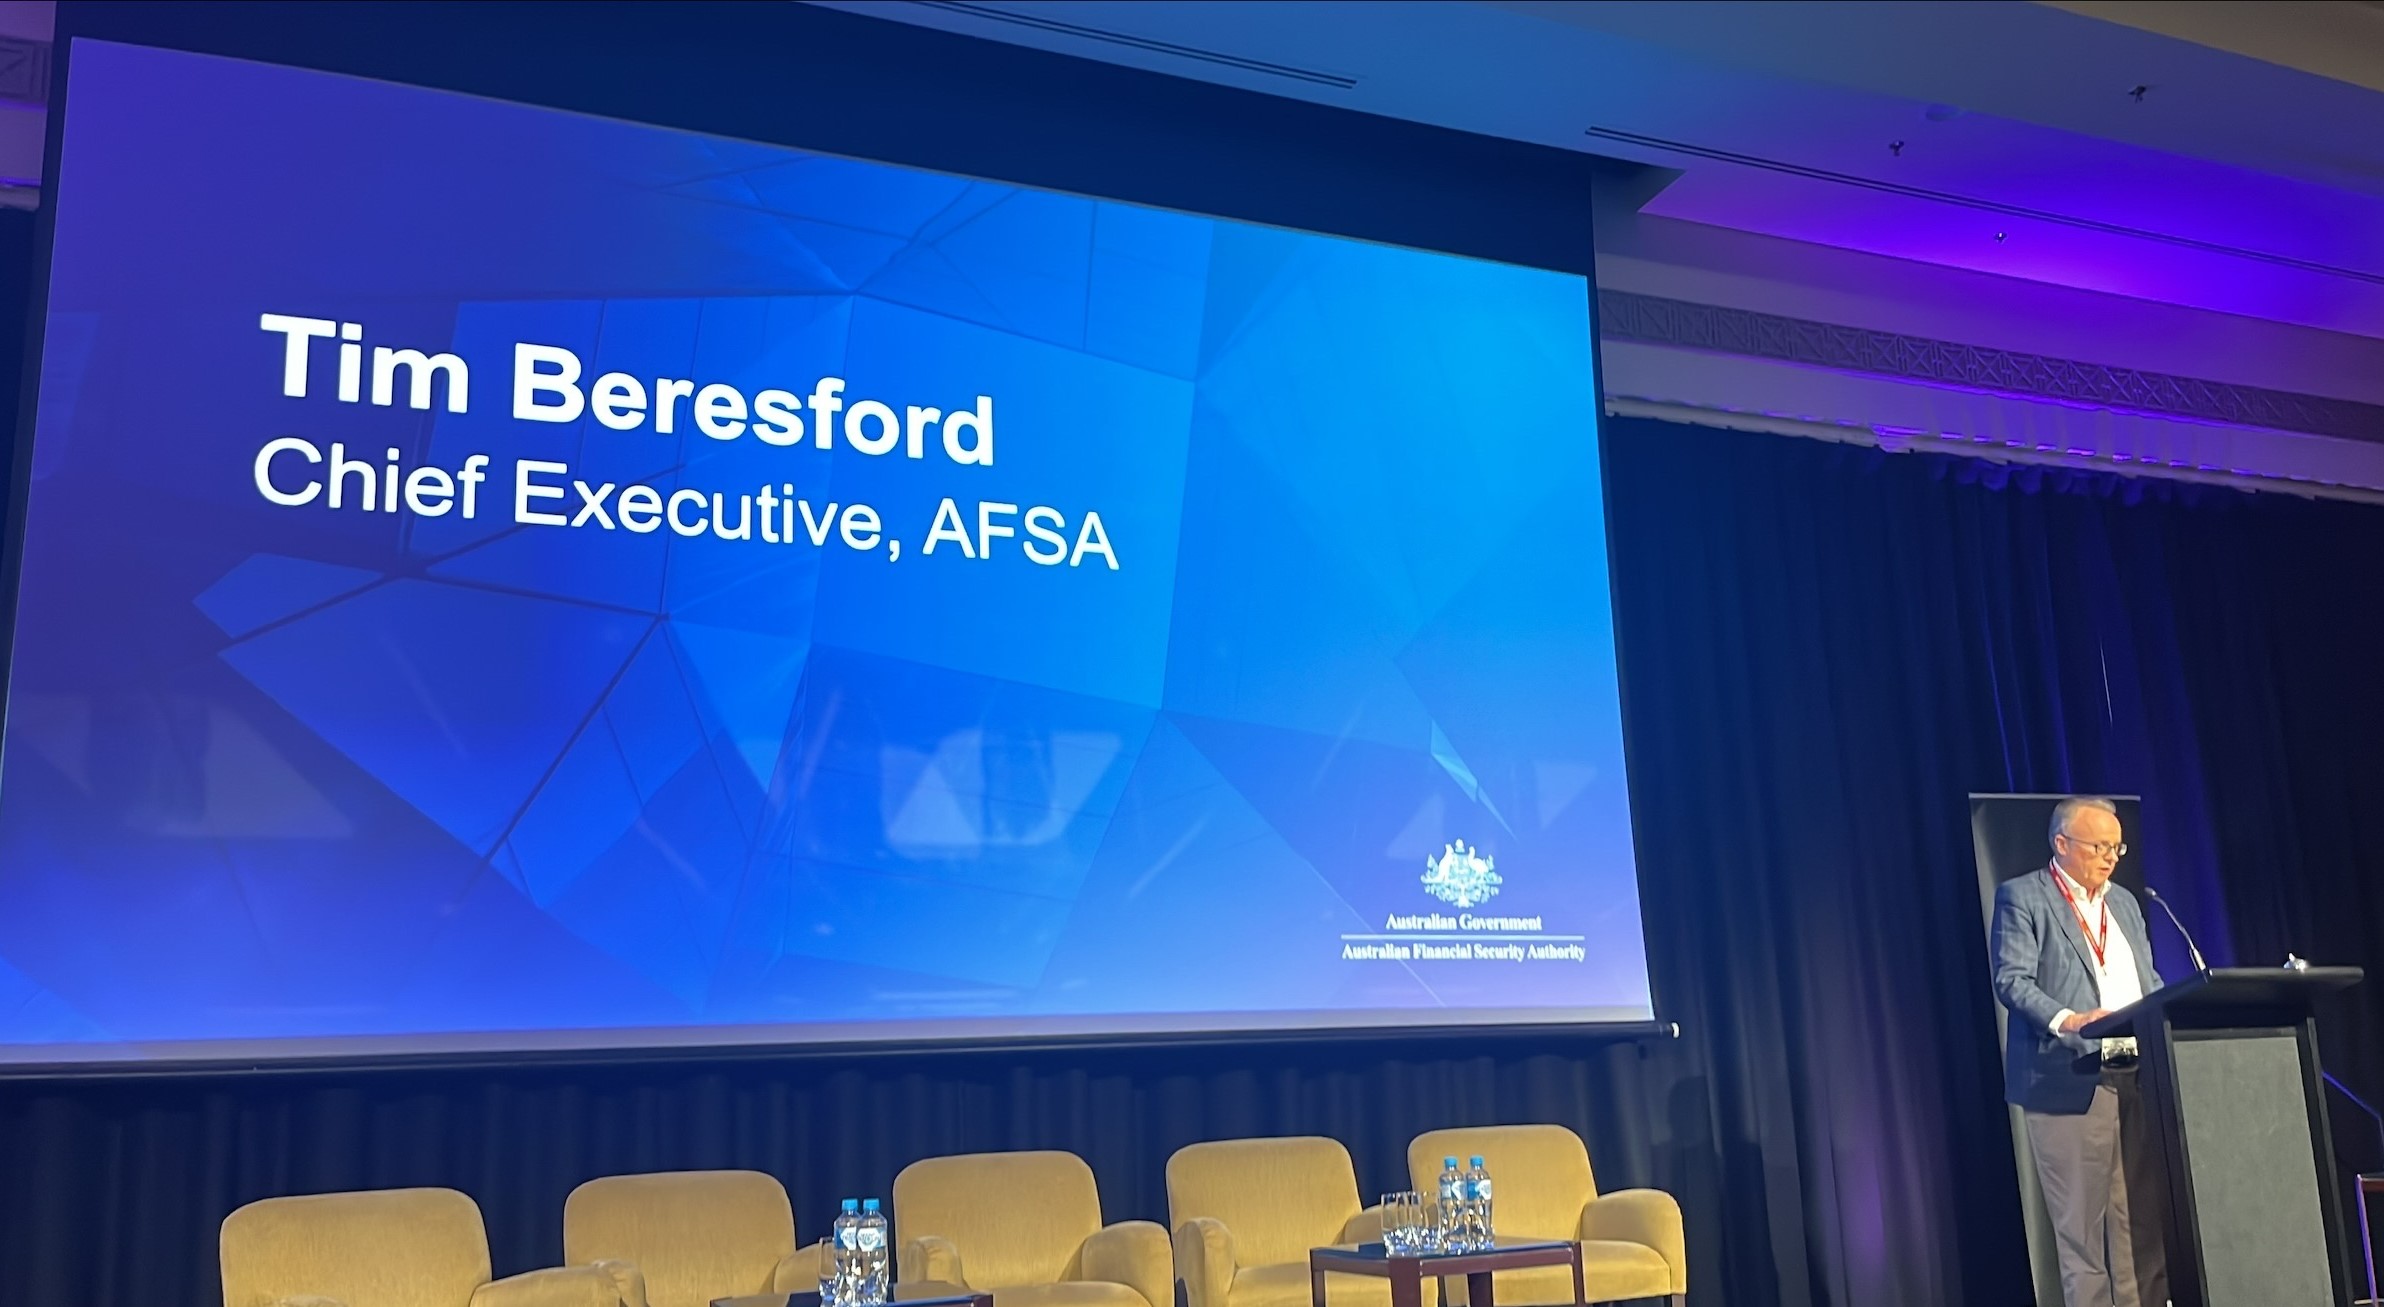 Tim Beresford, AFSA CEO, presenting with name and title on projected screen.